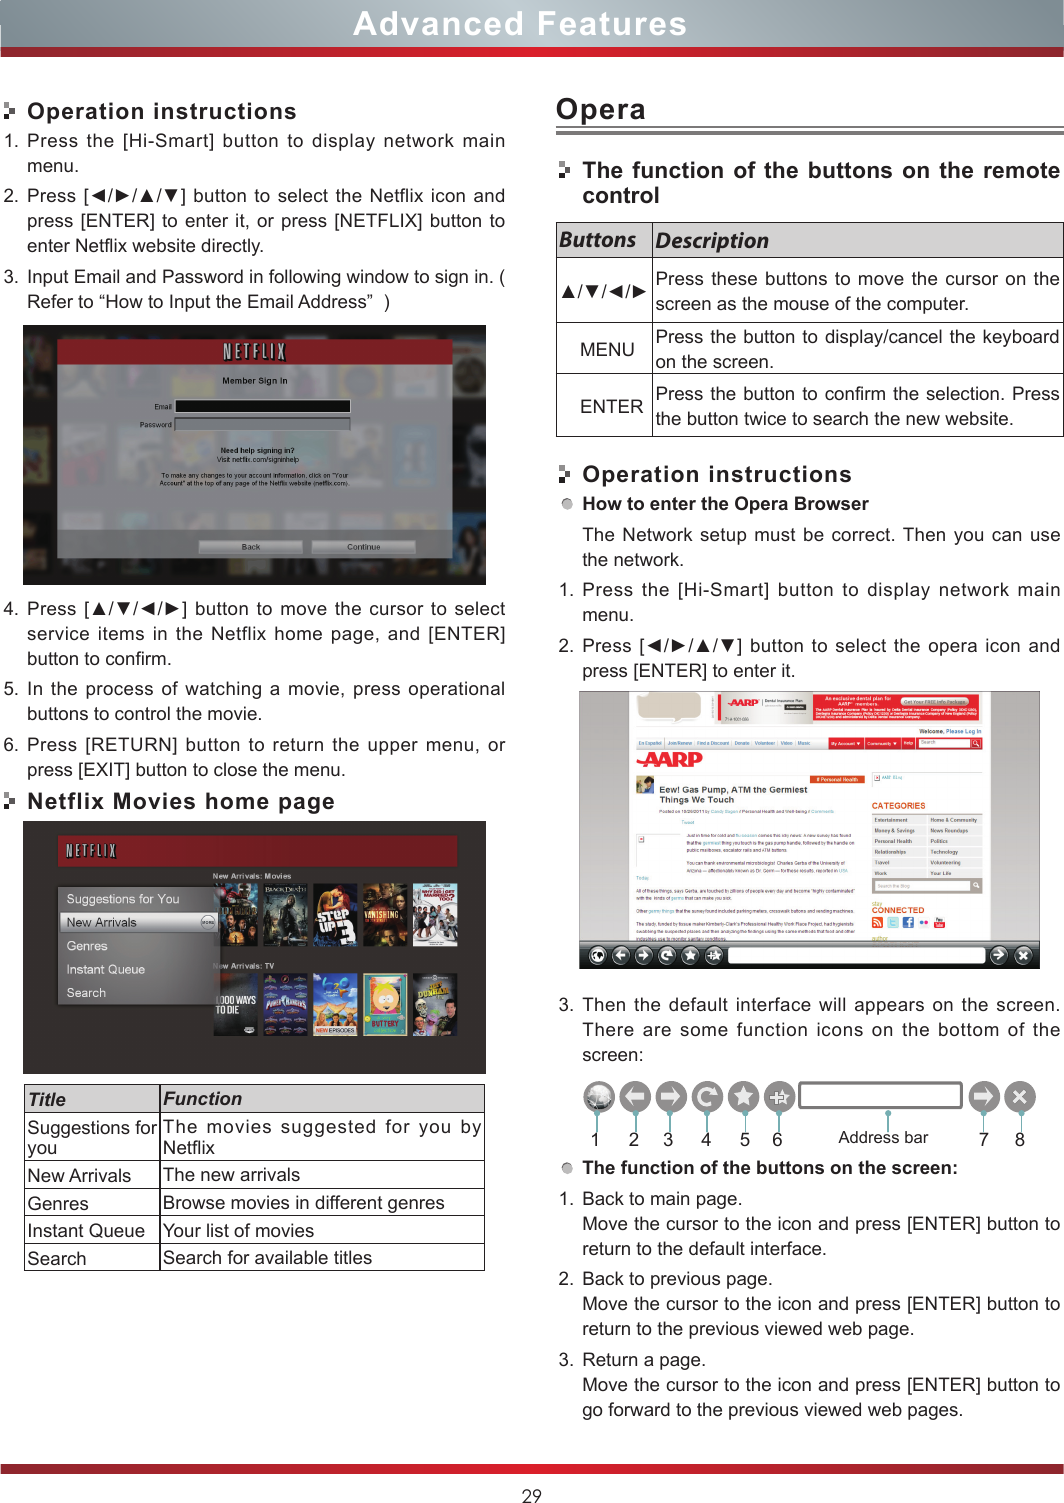 29Advanced FeaturesOperation instructions1. Press the [Hi-Smart] button to display network main menu.2. Press [◄/►/▲/▼] button to select the  Netflix  icon and press [ENTER] to enter it, or press [NETFLIX] button to enter Netflix website directly.    3. Input Email and Password in following window to sign in. ( Refer to “How to Input the Email Address”  )4. Press [▲/▼/◄/►] button  to  move the  cursor to  select service items in the Netflix home page, and [ENTER] button to confirm.5. In the process of watching a movie, press operational buttons to control the movie. 6. Press [RETURN] button to return the upper menu, or press [EXIT] button to close the menu.Netflix Movies home pageTitle FunctionSuggestions for youThe movies suggested for you by NetflixNew Arrivals The new arrivalsGenres Browse movies in different genresInstant Queue Your list of moviesSearch Search for available titlesOperaThe function of the buttons on the remote controlOperation instructionsHow to enter the Opera BrowserThe Network setup must be correct. Then you can use the network.1. Press the [Hi-Smart] button to display network main menu.2. Press [◄/►/▲/▼] button  to  select the  opera  icon  and press [ENTER] to enter it.    3. Then the default interface will appears on the screen. There are some function icons on the bottom of the screen:The function of the buttons on the screen:1. Back to main page.Move the cursor to the icon and press [ENTER] button to return to the default interface.2. Back to previous page.Move the cursor to the icon and press [ENTER] button to return to the previous viewed web page.3. Return a page.Move the cursor to the icon and press [ENTER] button to go forward to the previous viewed web pages.Buttons Description▲/▼/◄/► Press these buttons to move the cursor on the screen as the mouse of the computer.    MENU Press the button to display/cancel the keyboard on the screen.    ENTER Press the button to confirm the selection. Press the button twice to search the new website.21 3 4 5 6 7 8Address bar